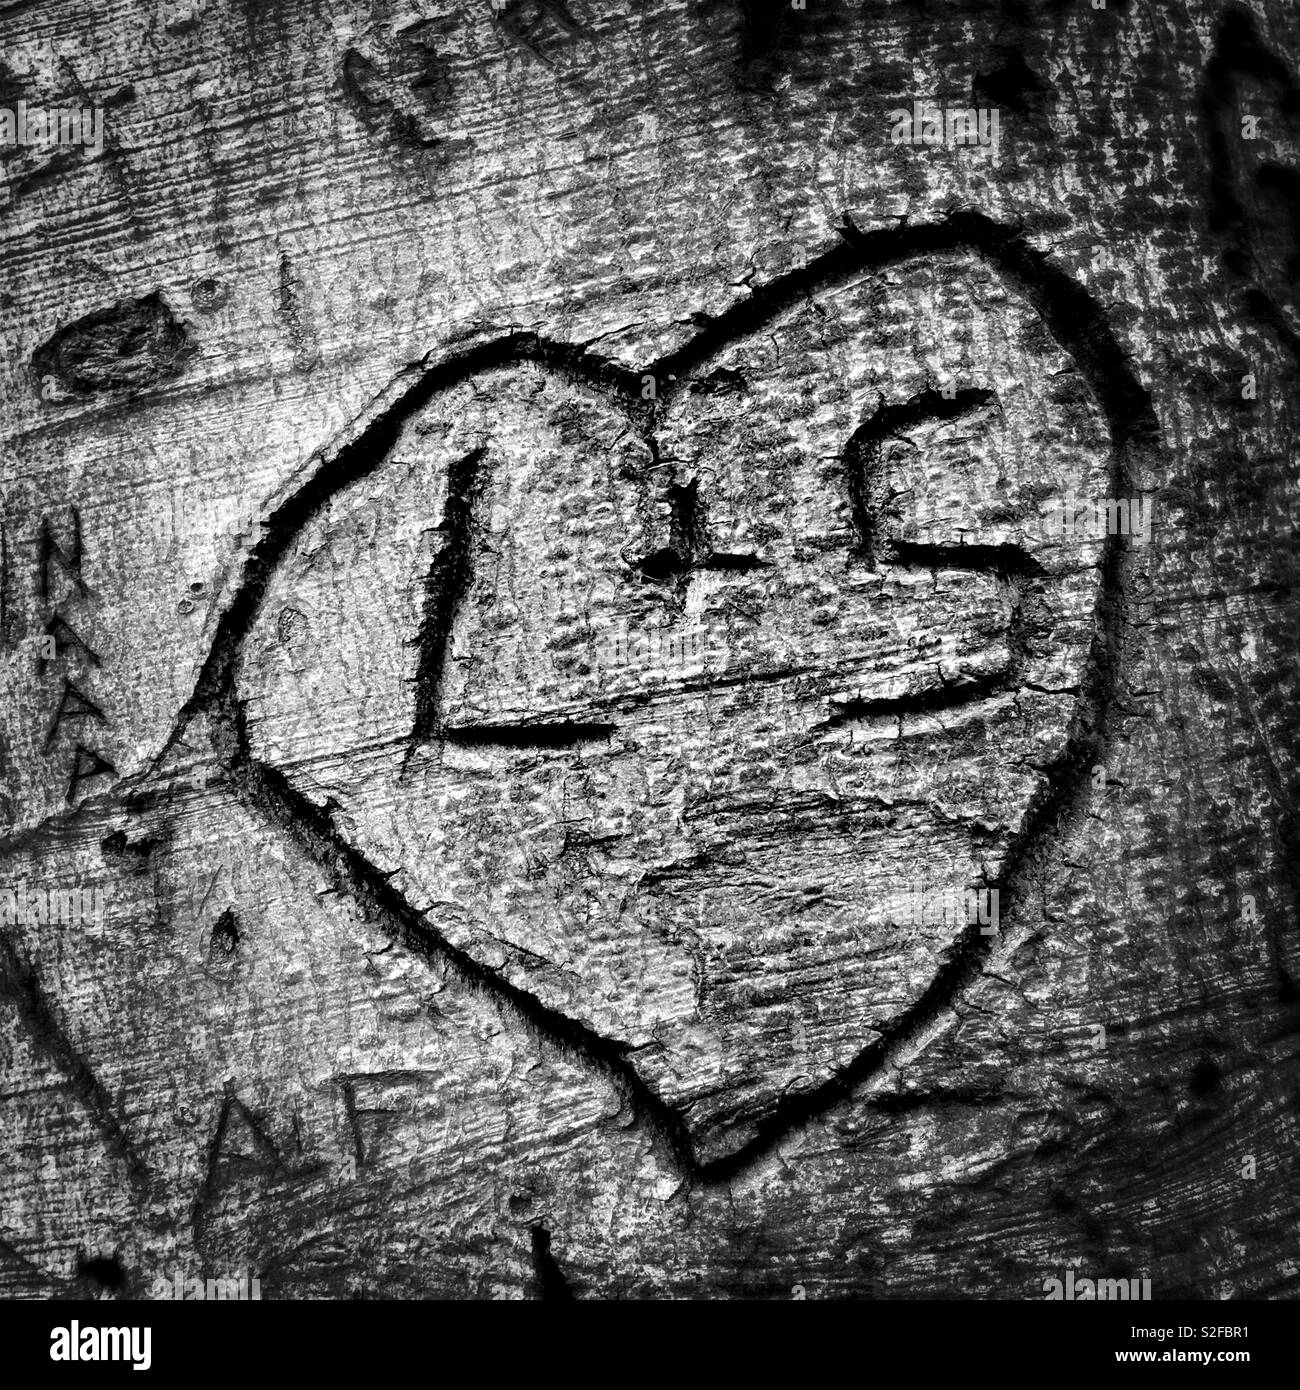 Heart and initials graffiti carved into tree trunk Stock Photo